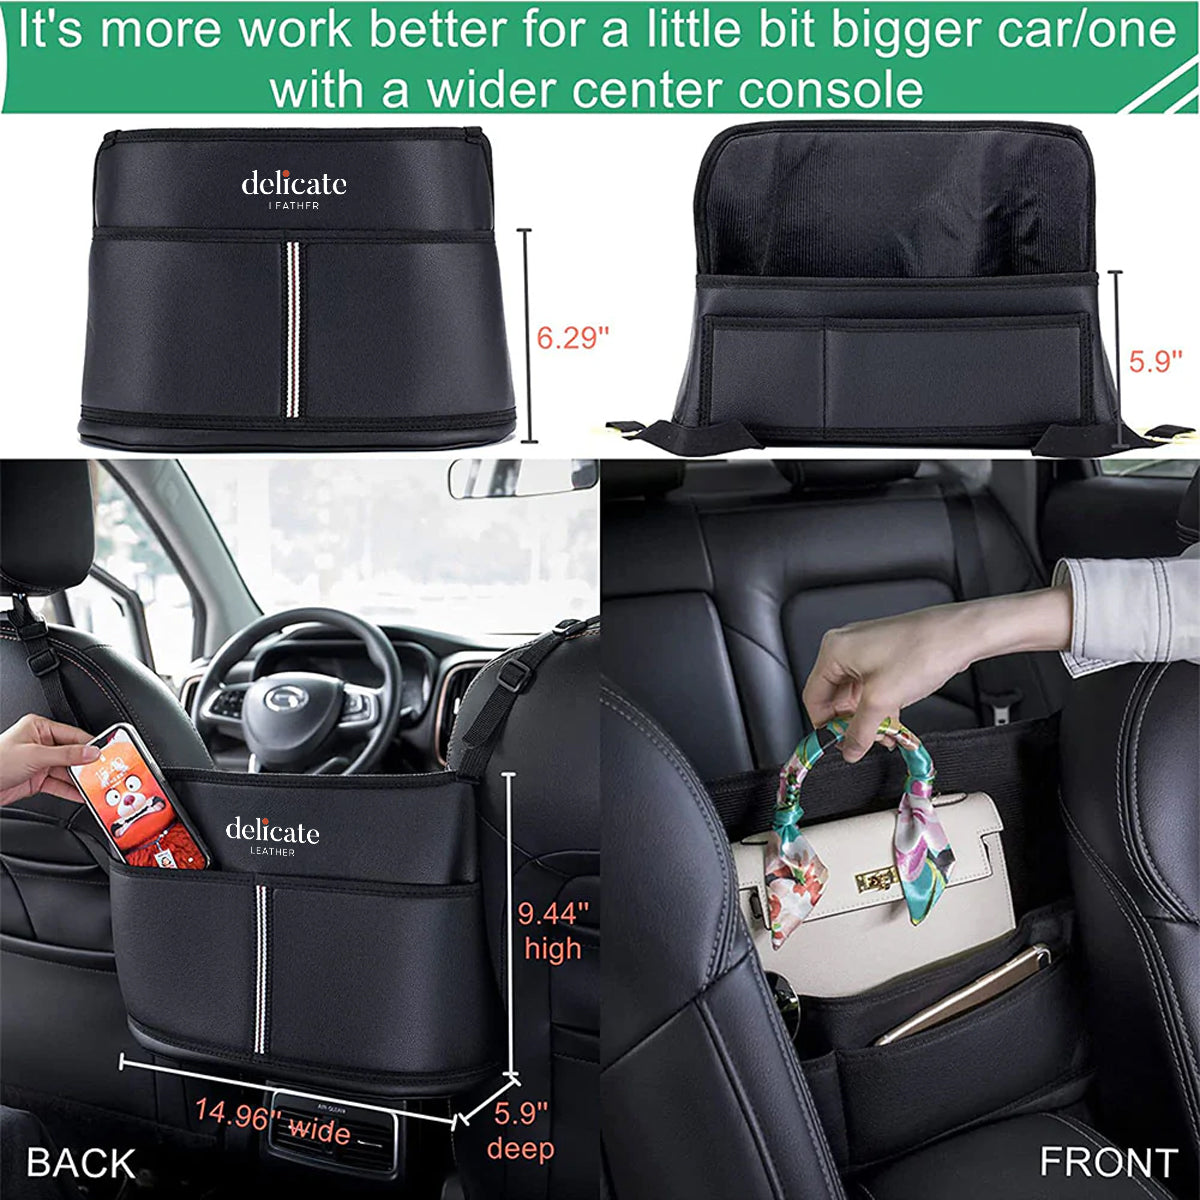 Car Purse Holder for Car Handbag Holder Between Seats Premium PU Leather, Custom Fit For Your Cars, Auto Driver Or Passenger Accessories Organizer, Hanging Car Purse Storage Pocket Back Seat Pet Barrier AR11991 - Delicate Leather